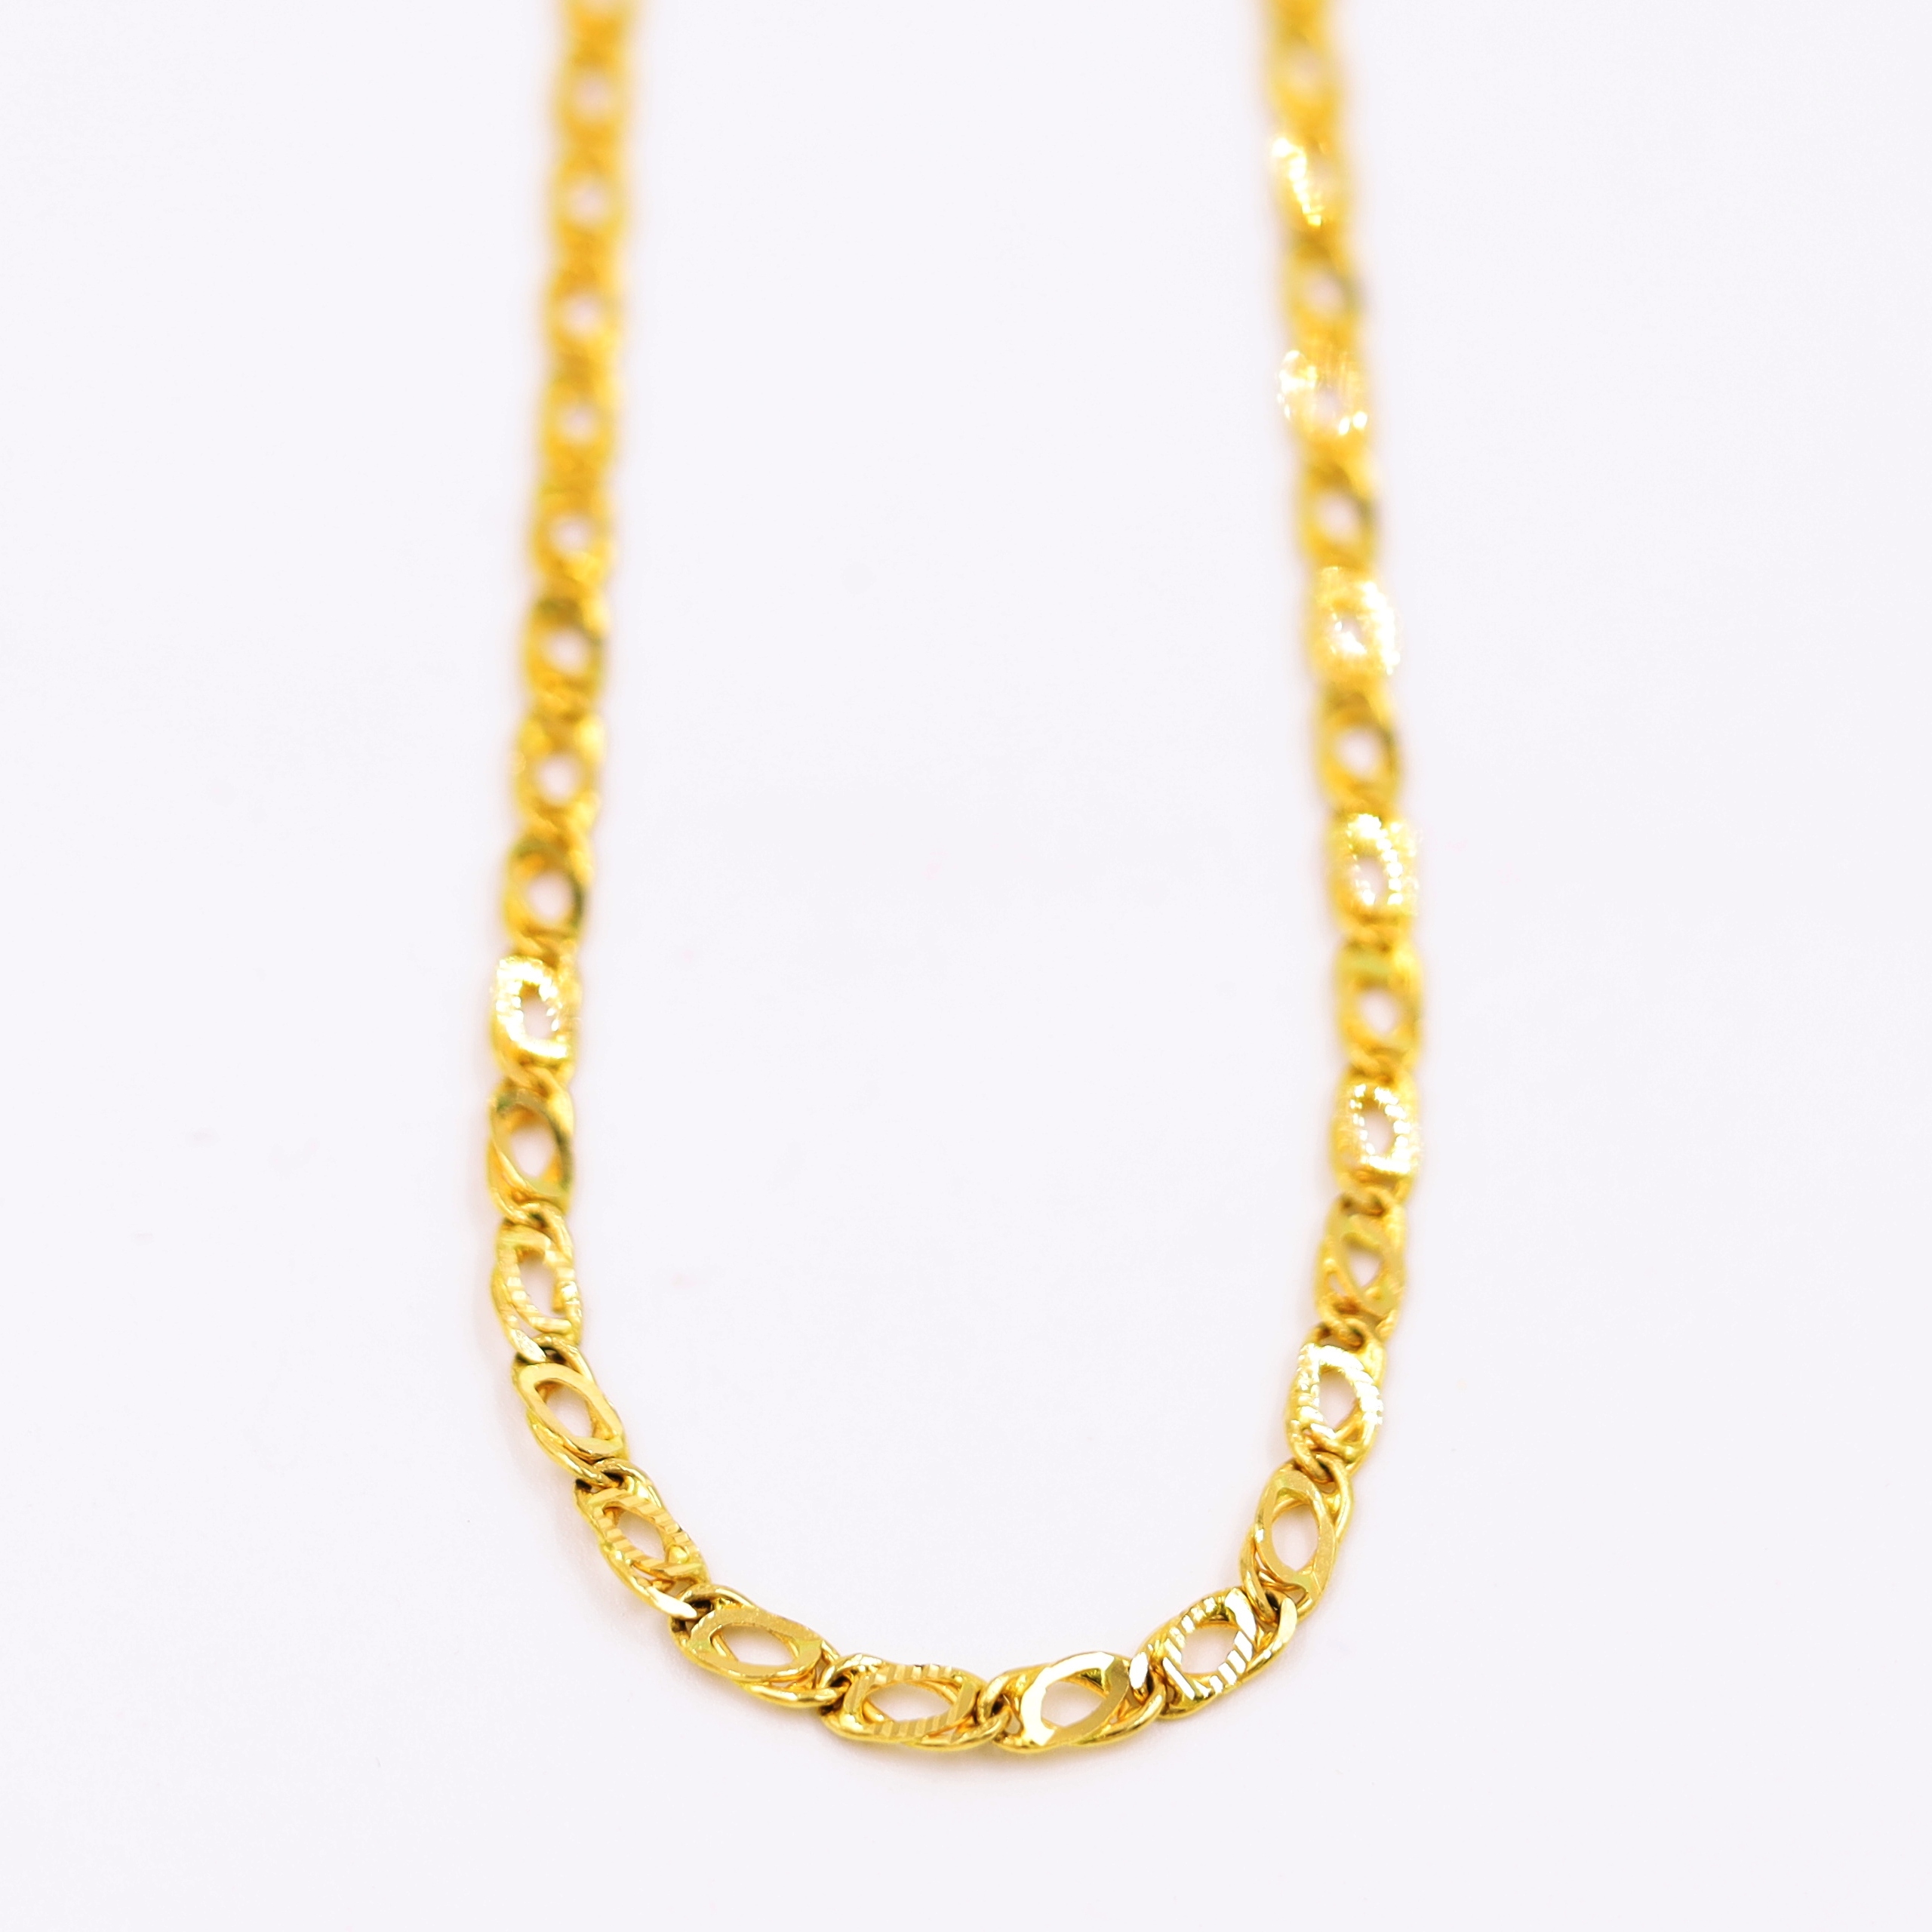 Magnificent Handmade Gold Chain For Men